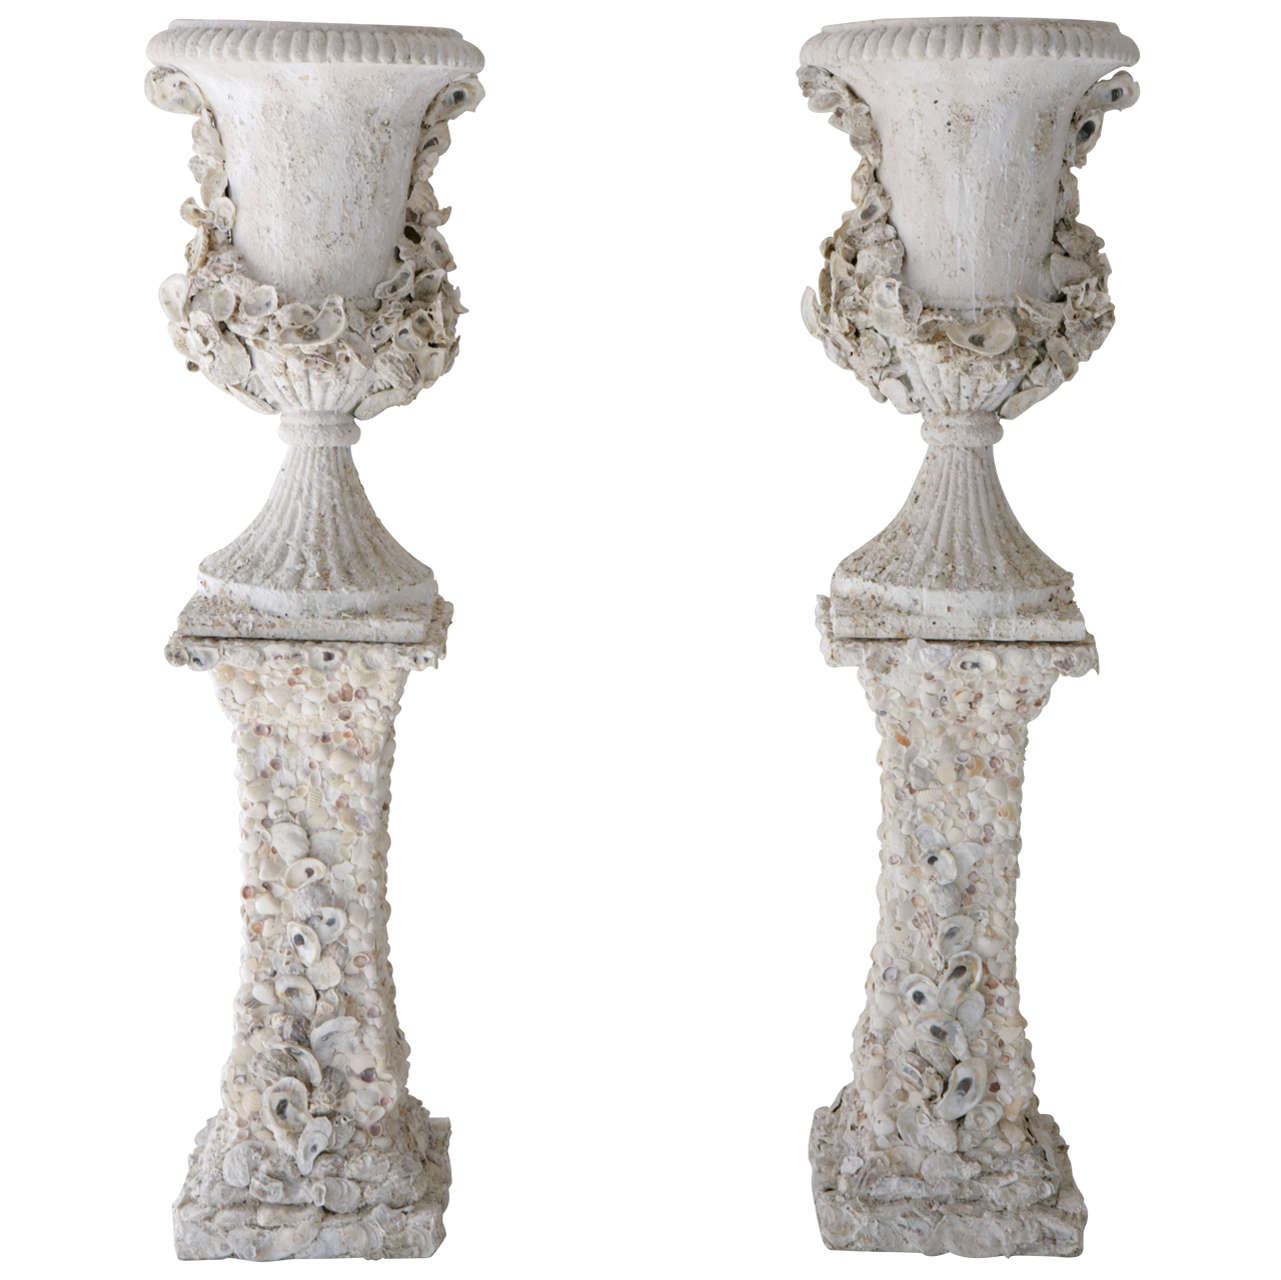 Grotto Style Shell Encrusted Urns on Pedestals